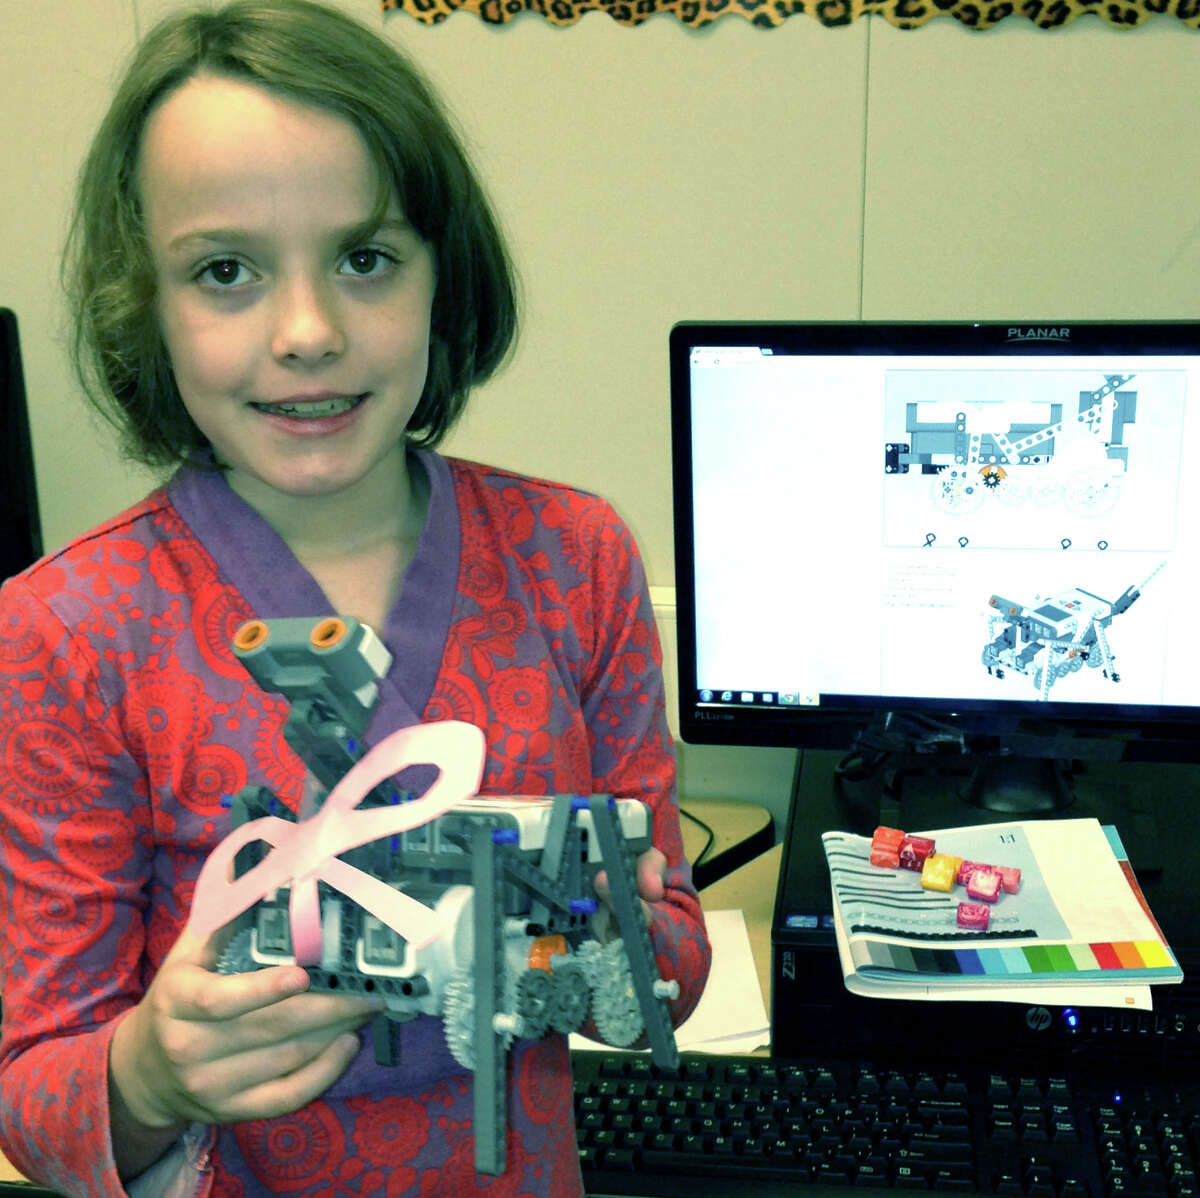 Madeline Martin shows off the robot she built during her experience in the Shepaug summer enrichment program. July 2013 Courtesy of Sheila Gambino